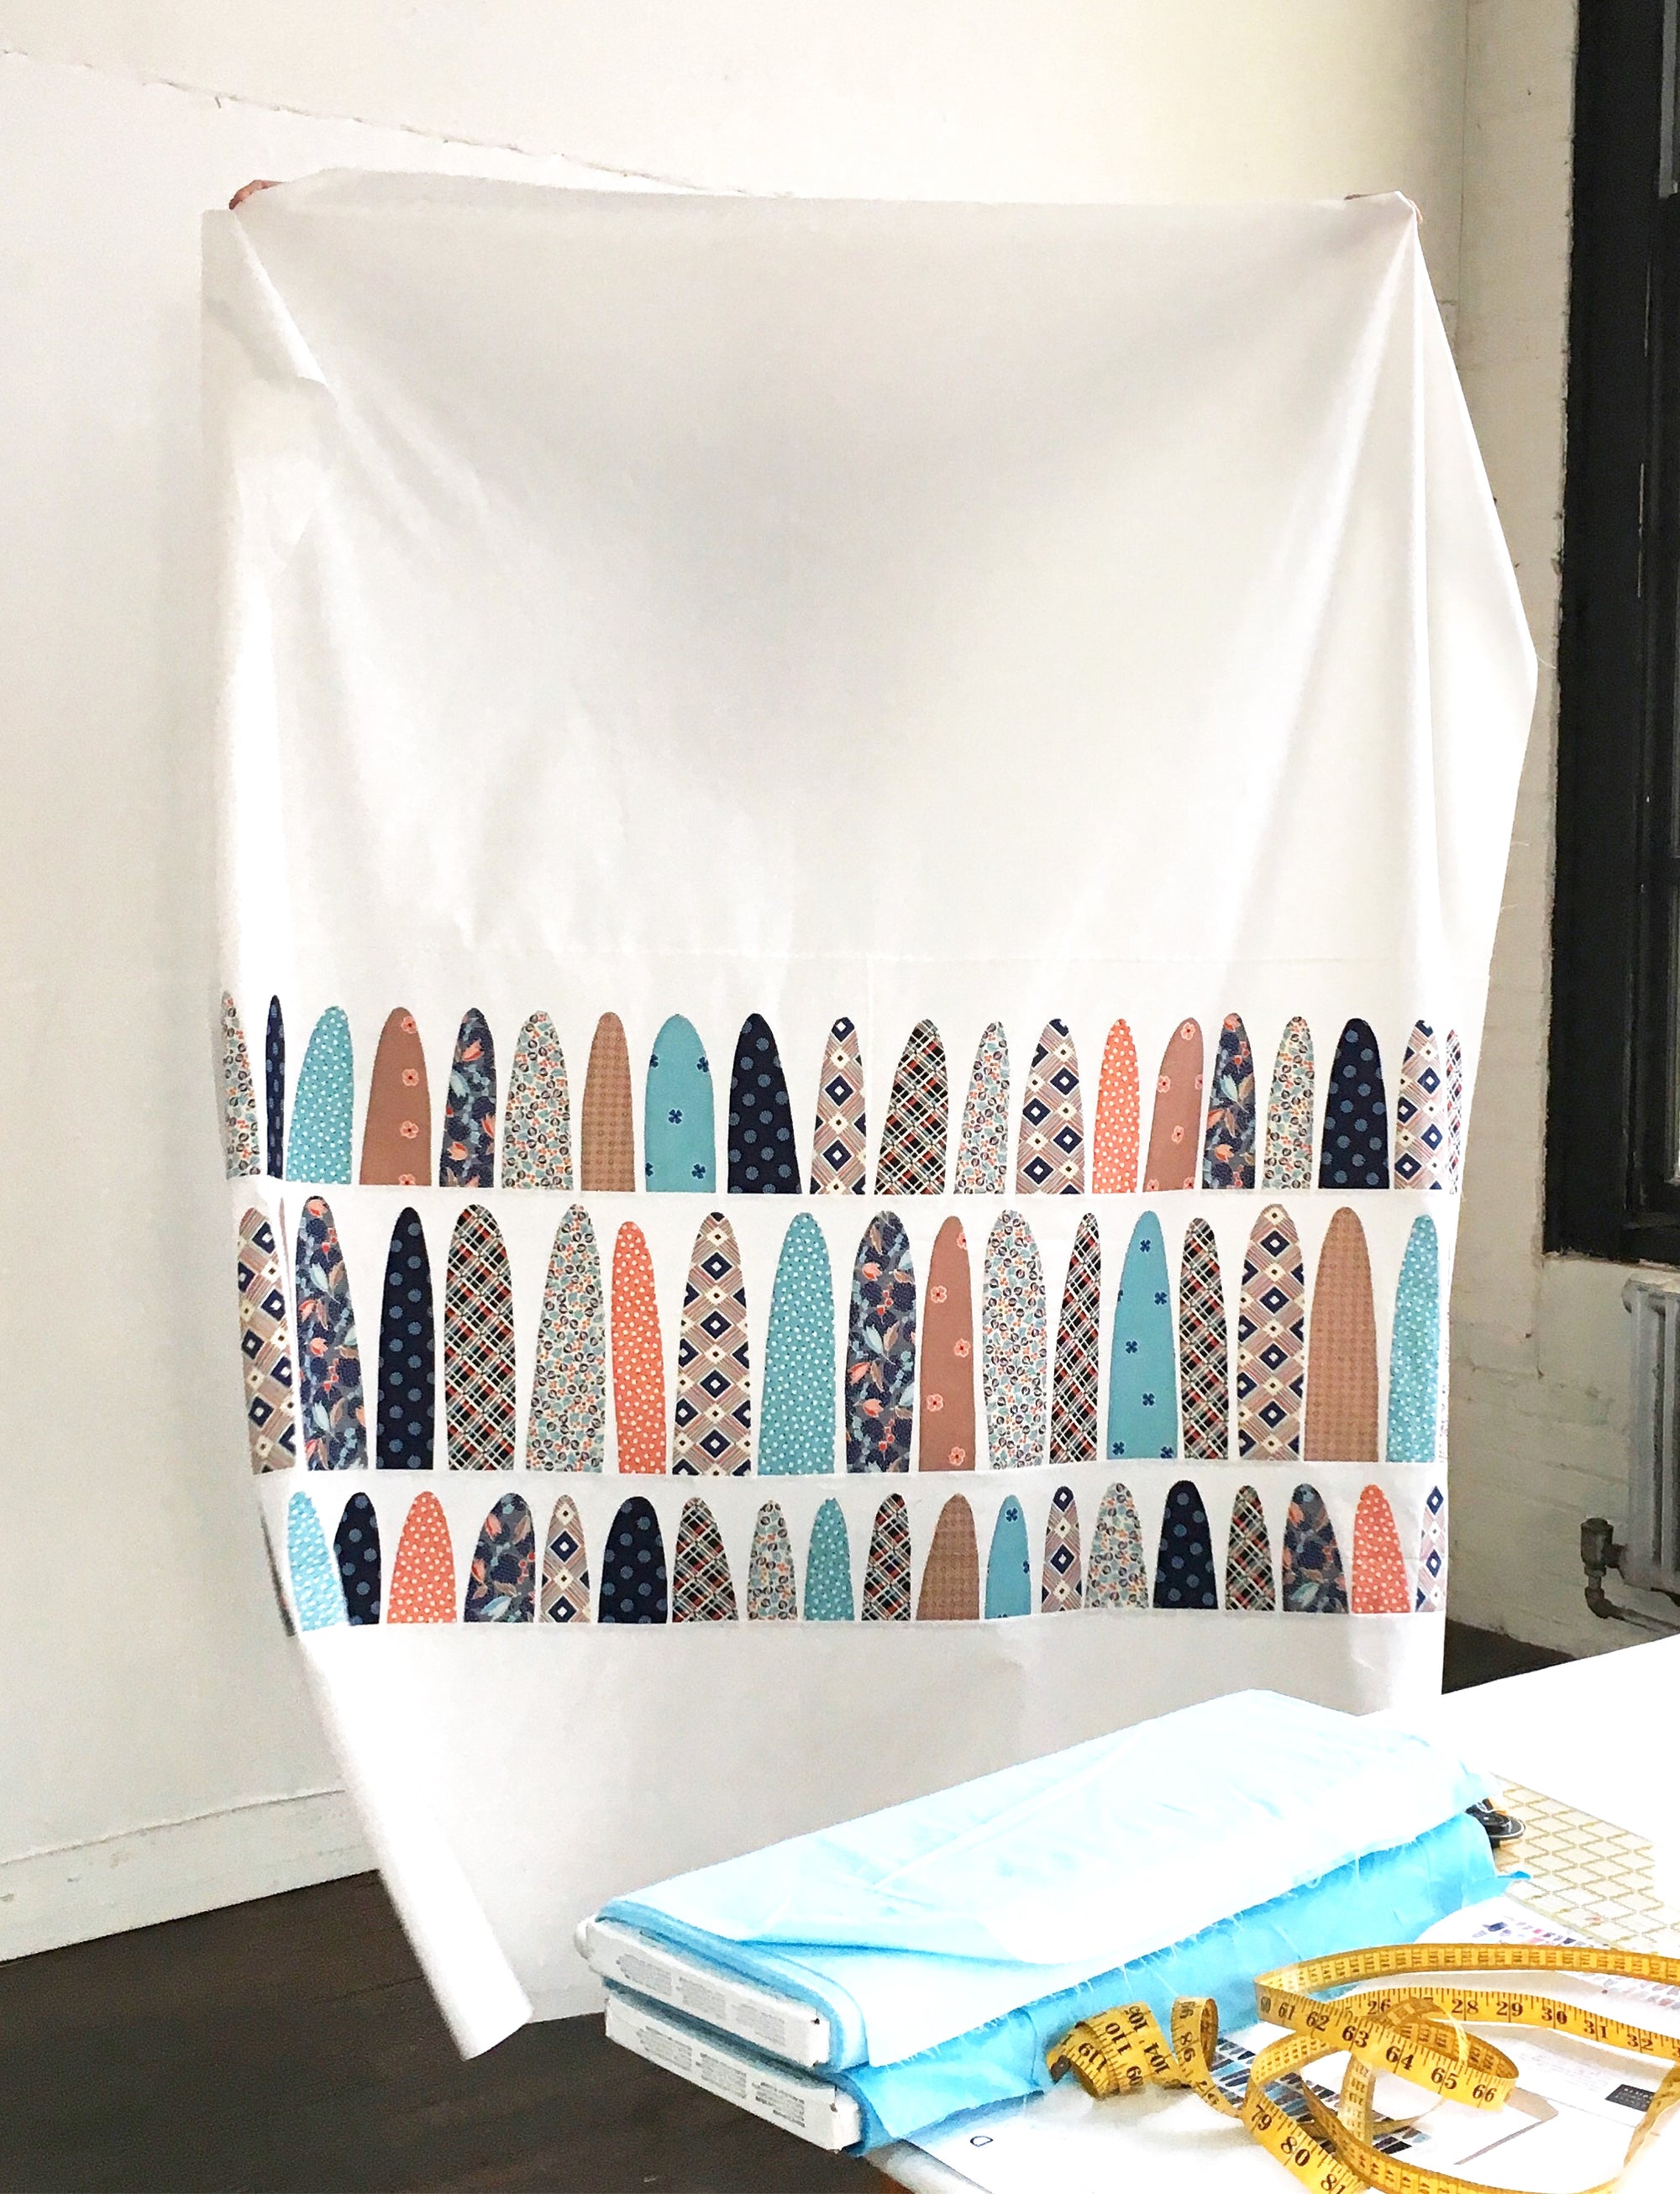 Hills &#39;n&#39; Hollers quilt pattern